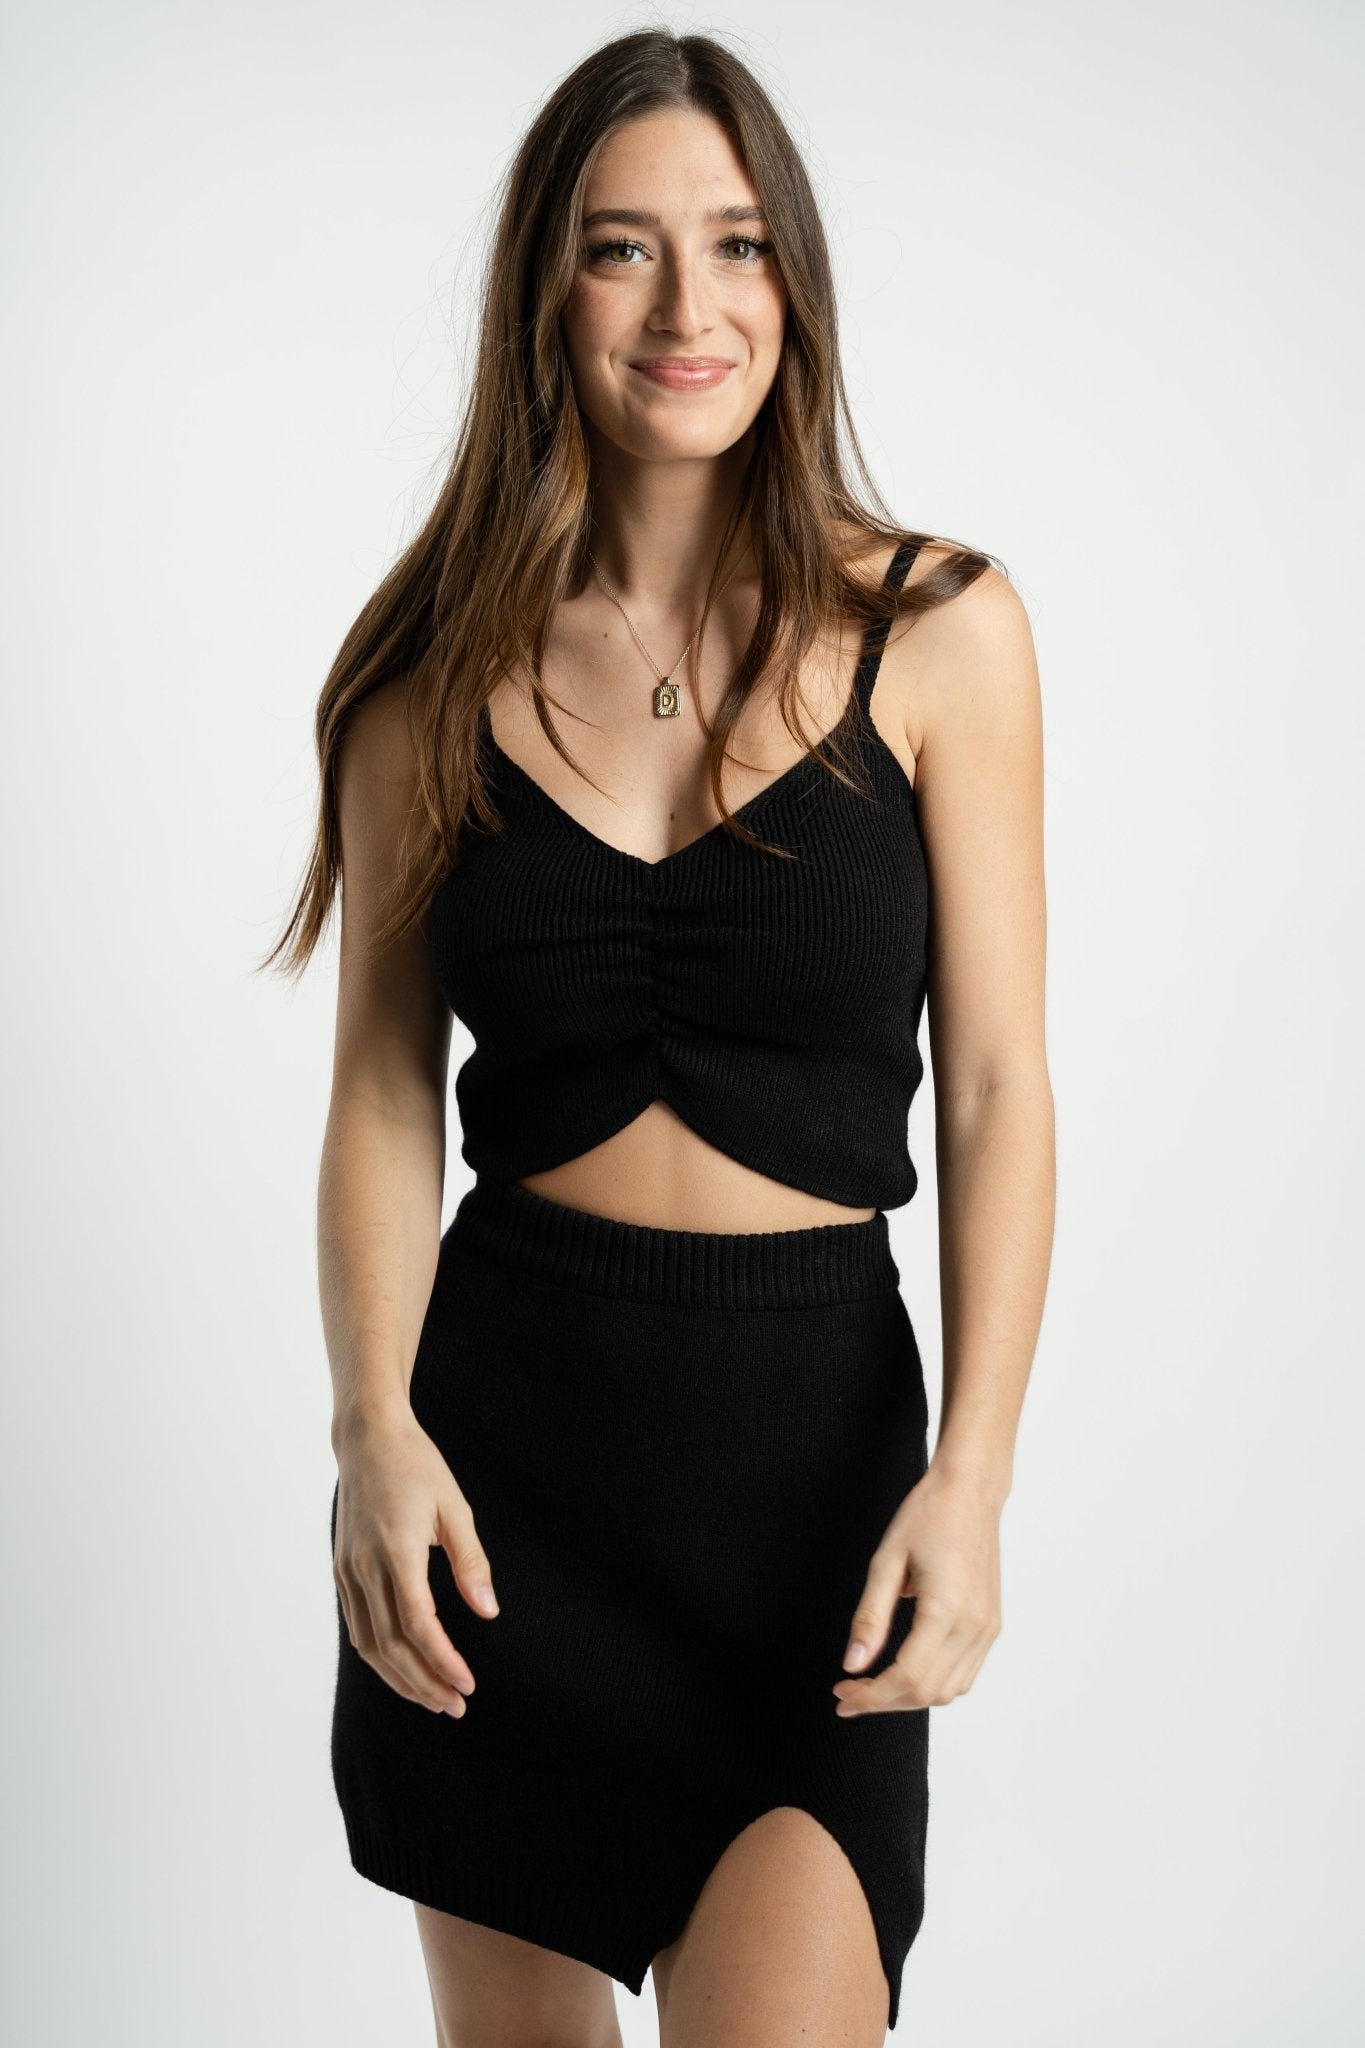 Ruched knit crop tank top black - Cute Top - Trendy Tank Tops at Lush Fashion Lounge Boutique in Oklahoma City